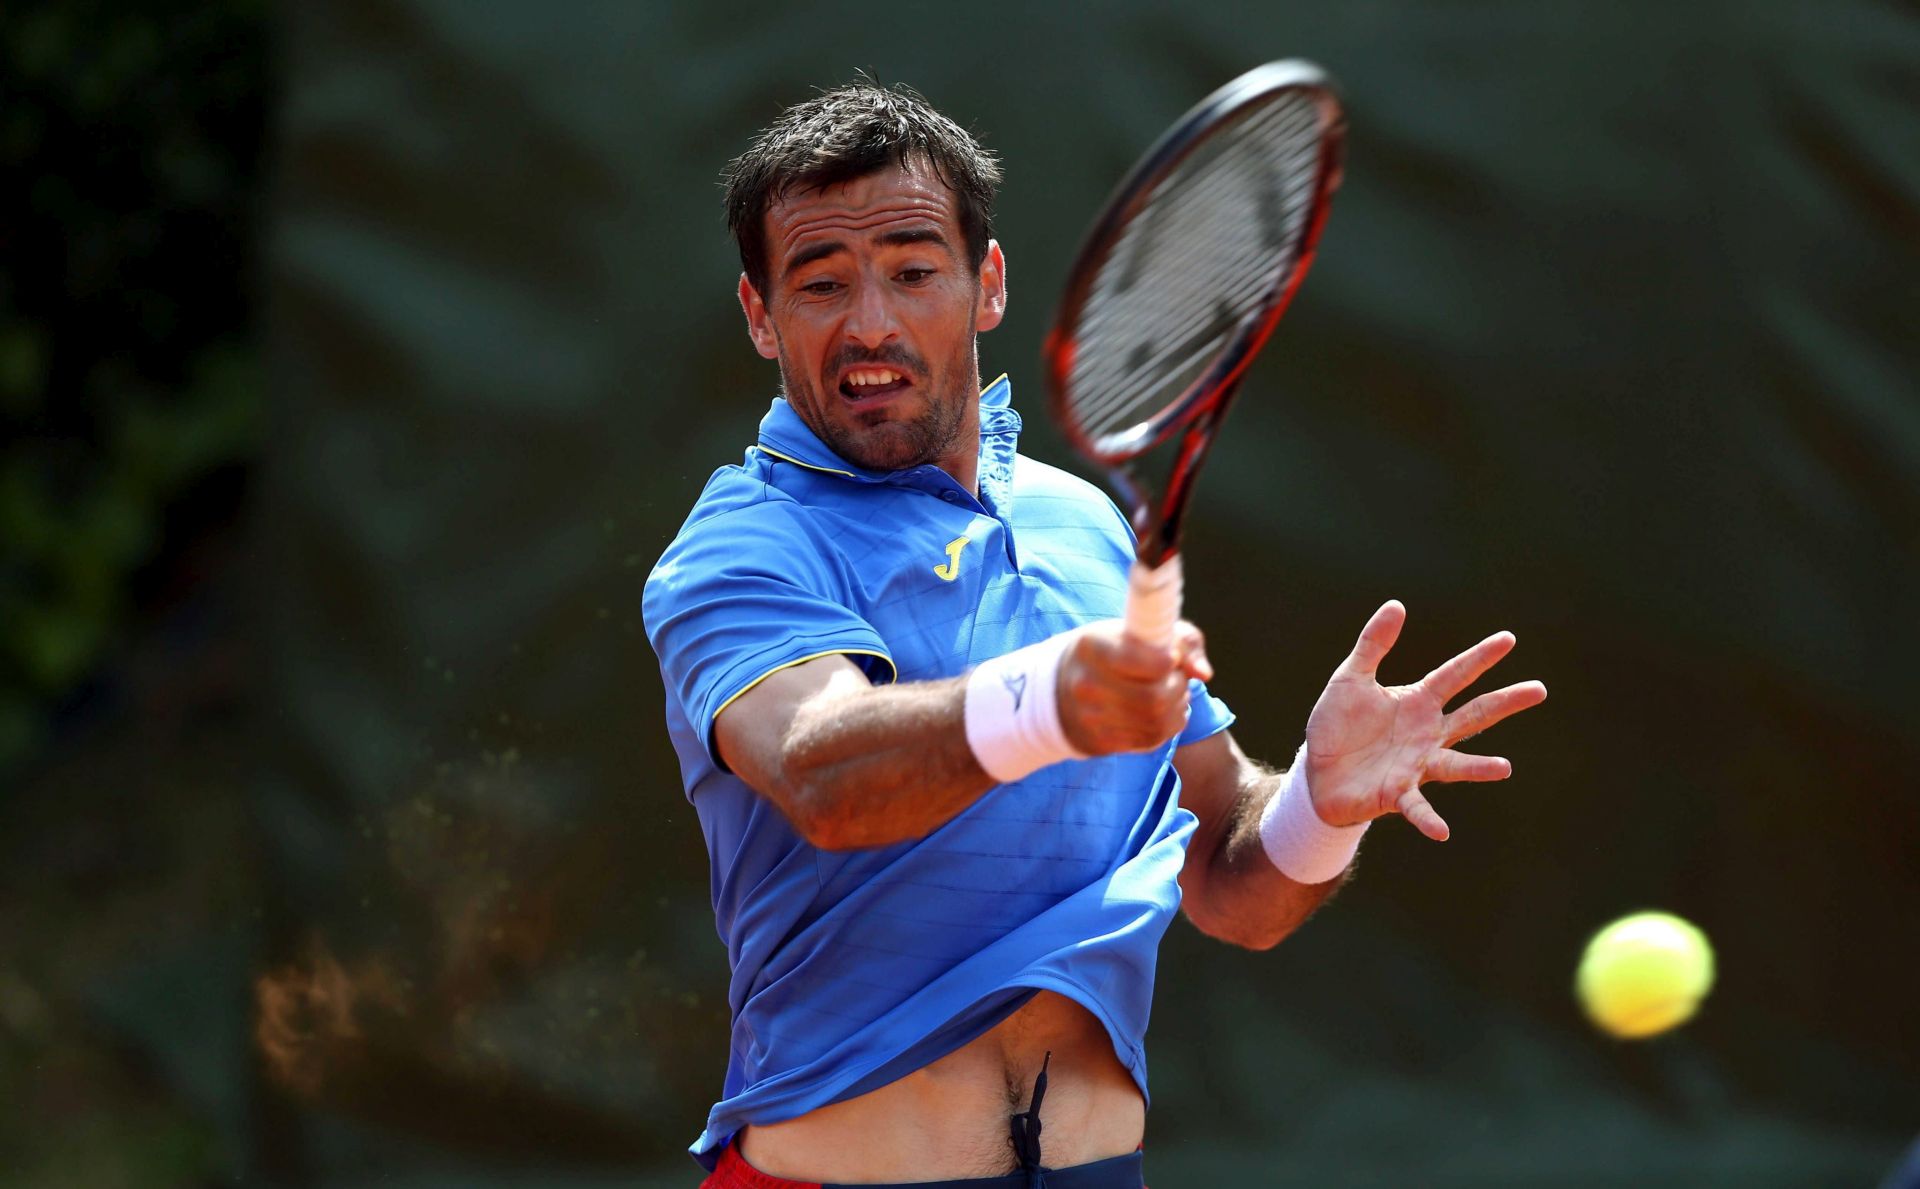 epa05267173 Croatian tennis player Ivan Dodig returns the ball to Argentinian Pedro Cachin during their first round match at Barcelona Open Banc Sabadell Conde de Godo tournament in Barcelona, northeastern Spain, 19 April 2016. The tournament runs in Barcelona from 18 until 24 April 2016.  EPA/Toni Albir